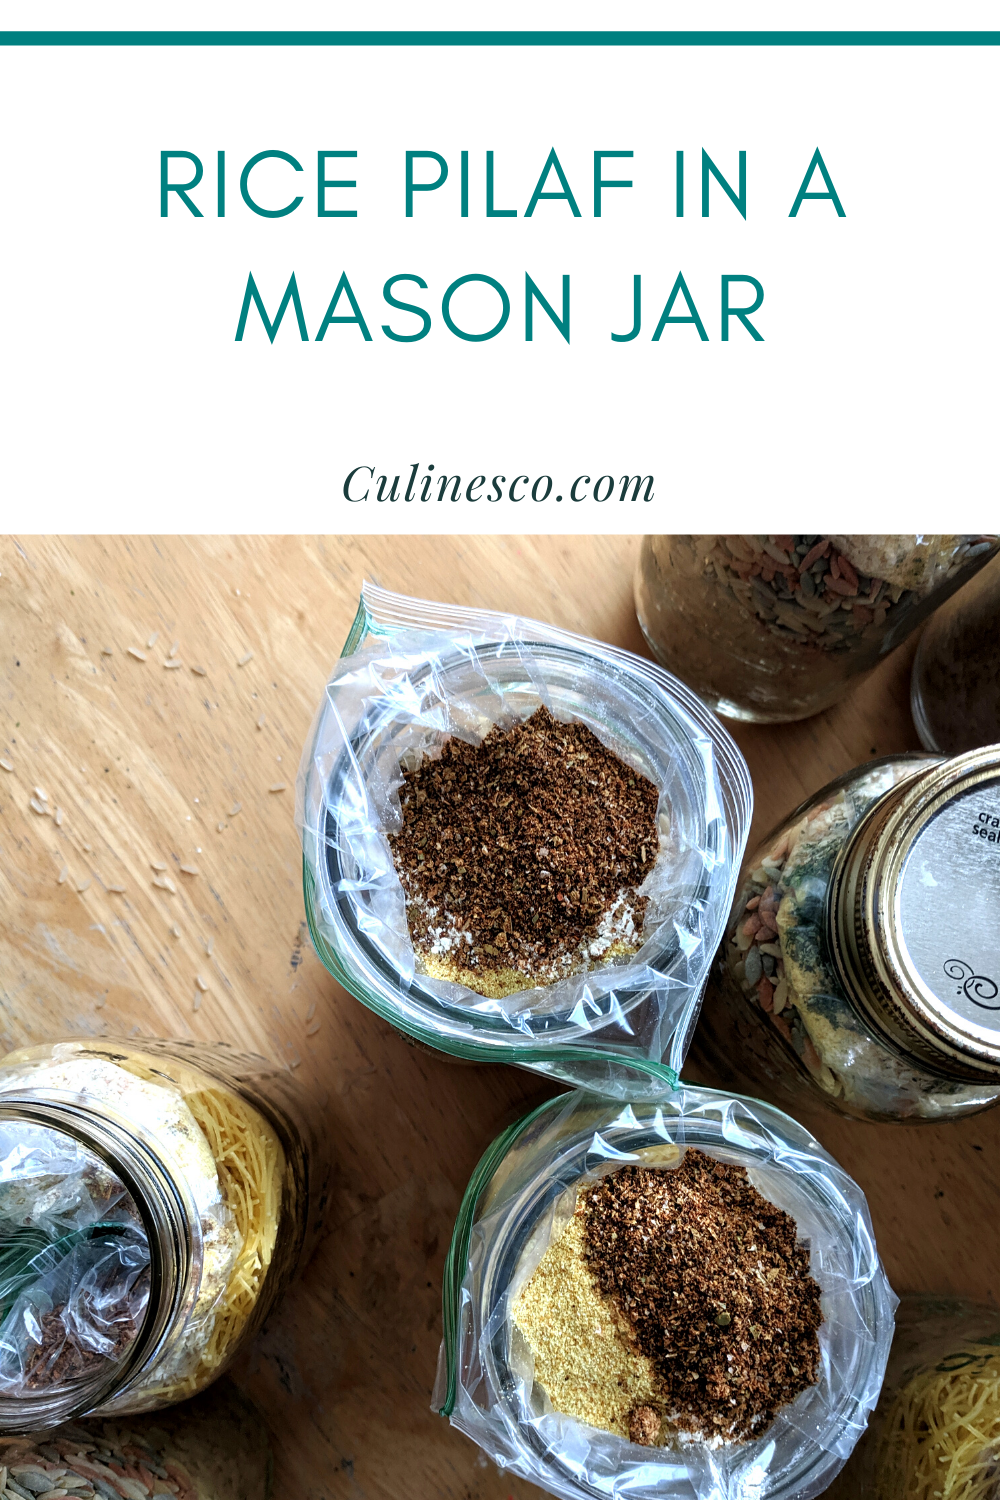 Rice pilaf is an easy side dish made even easier by storing it in a mason jar, ready to cook. Get the recipe and instructions!